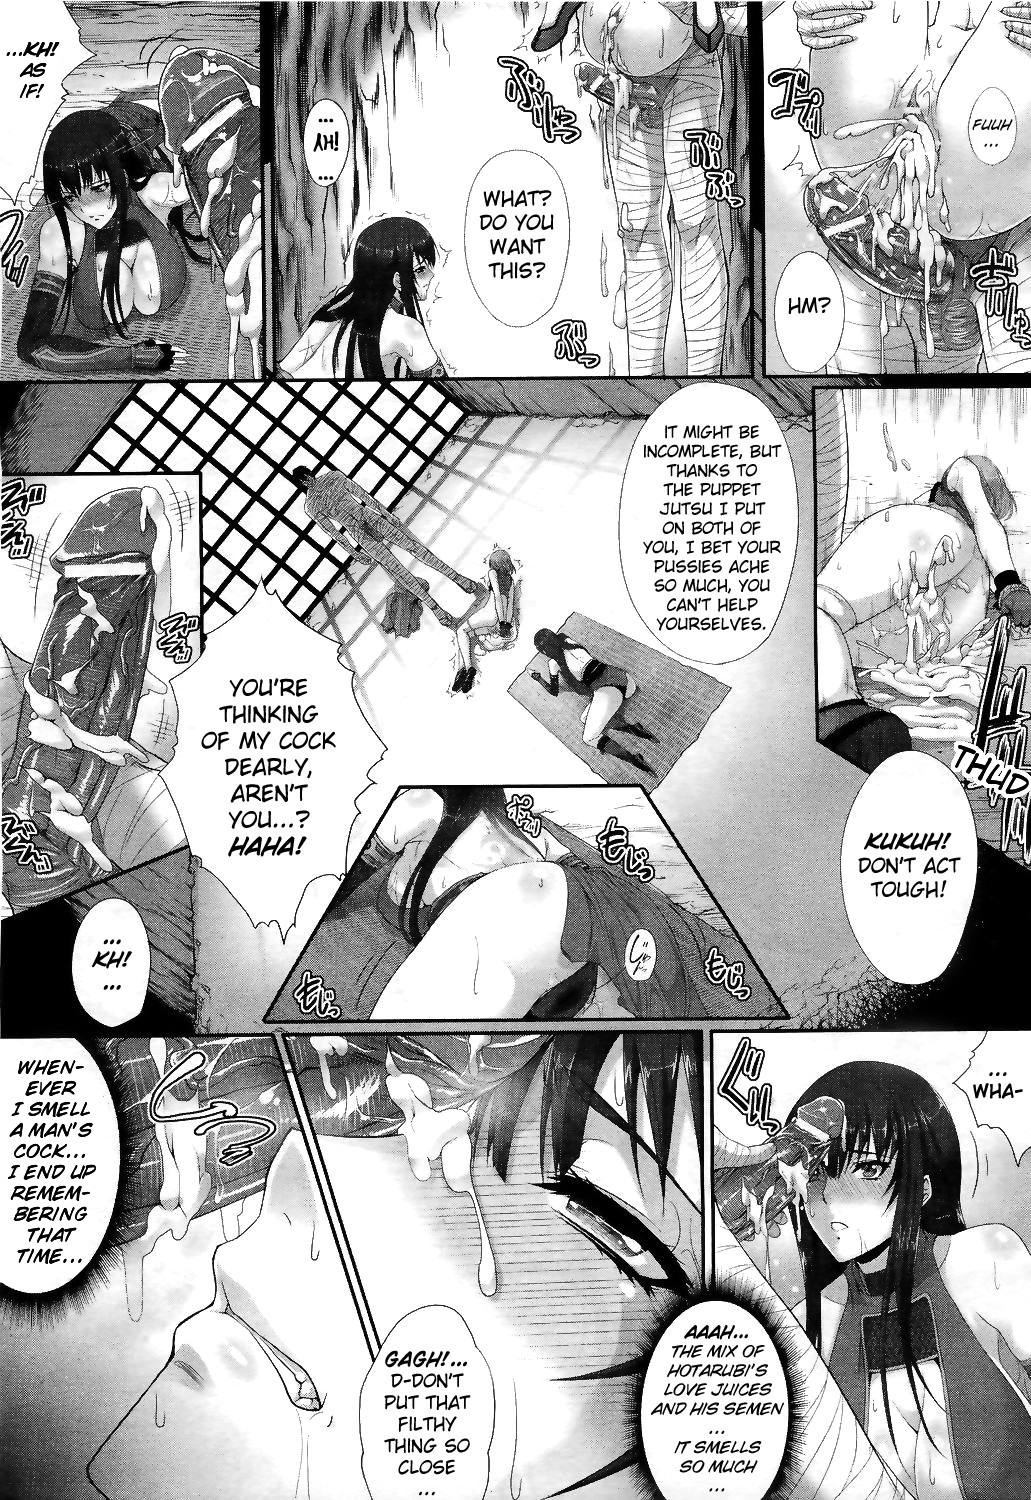 [Zucchini] Misao - Sex Slave Ninpo Legend [Eng] {doujin-moe.us} page 5 full